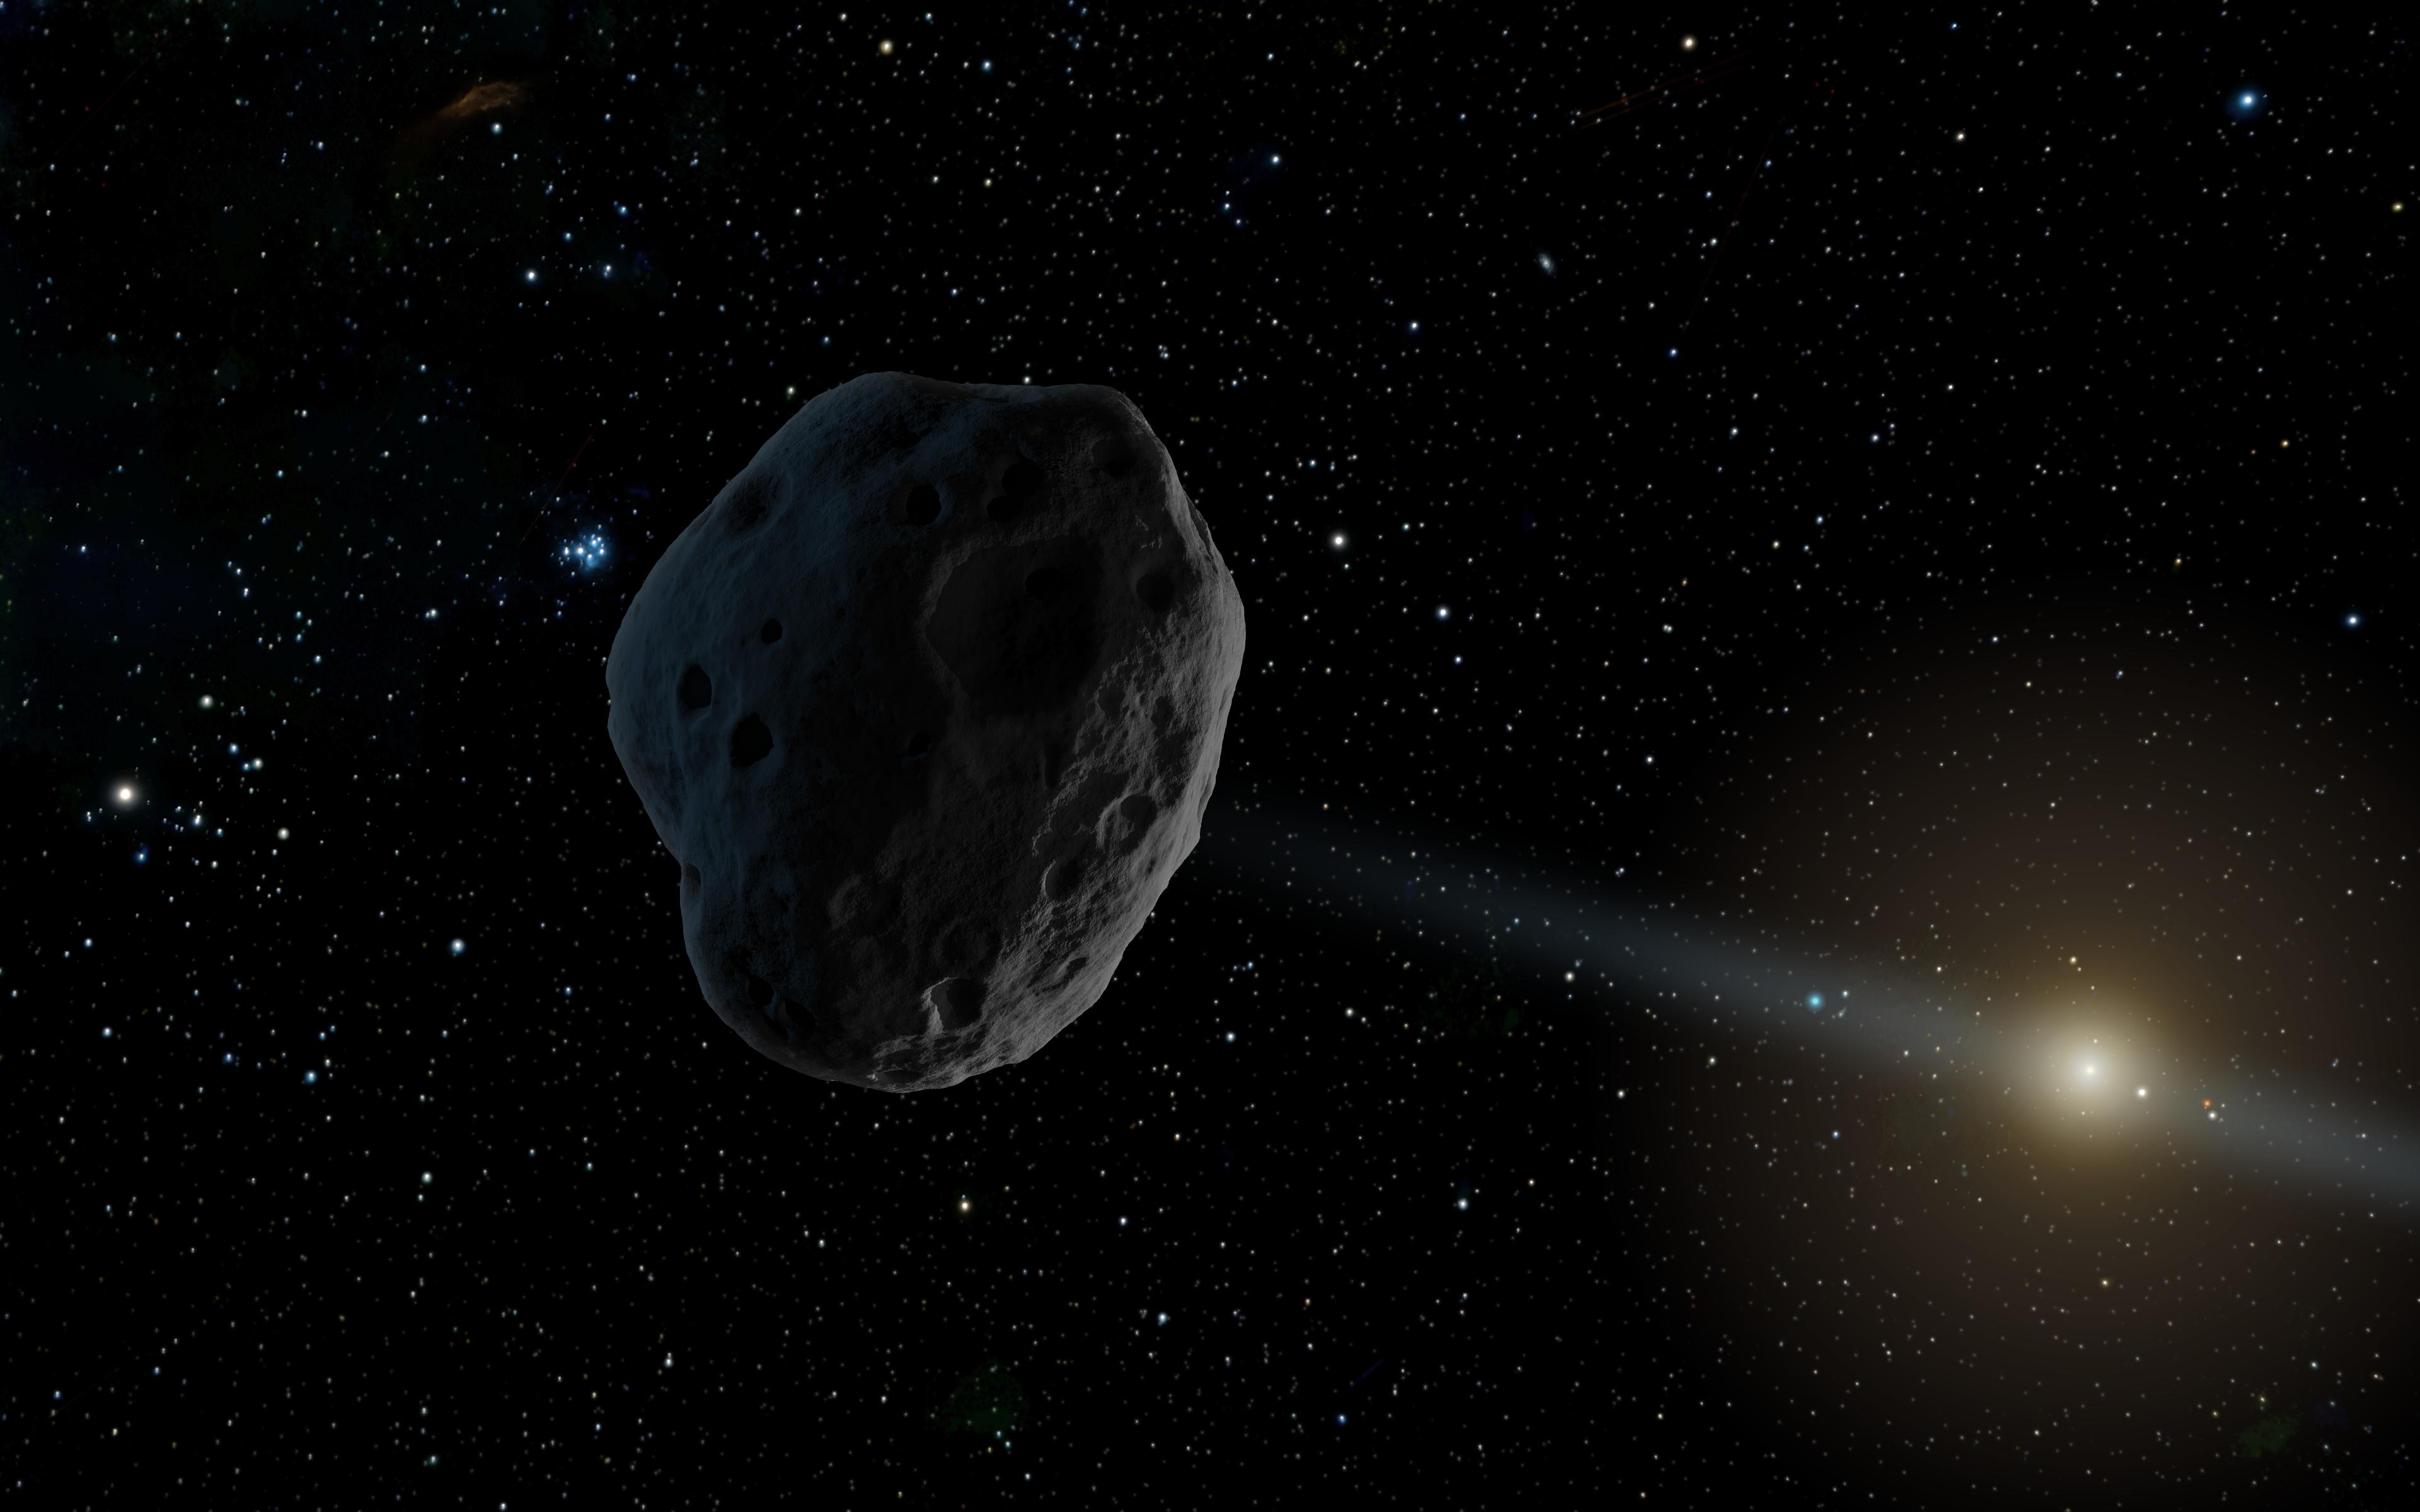 PIA21259_-_Celestial_Object_2016_WF9,_a_NEOWISE_Discovery_(Artist_Concept).jpg